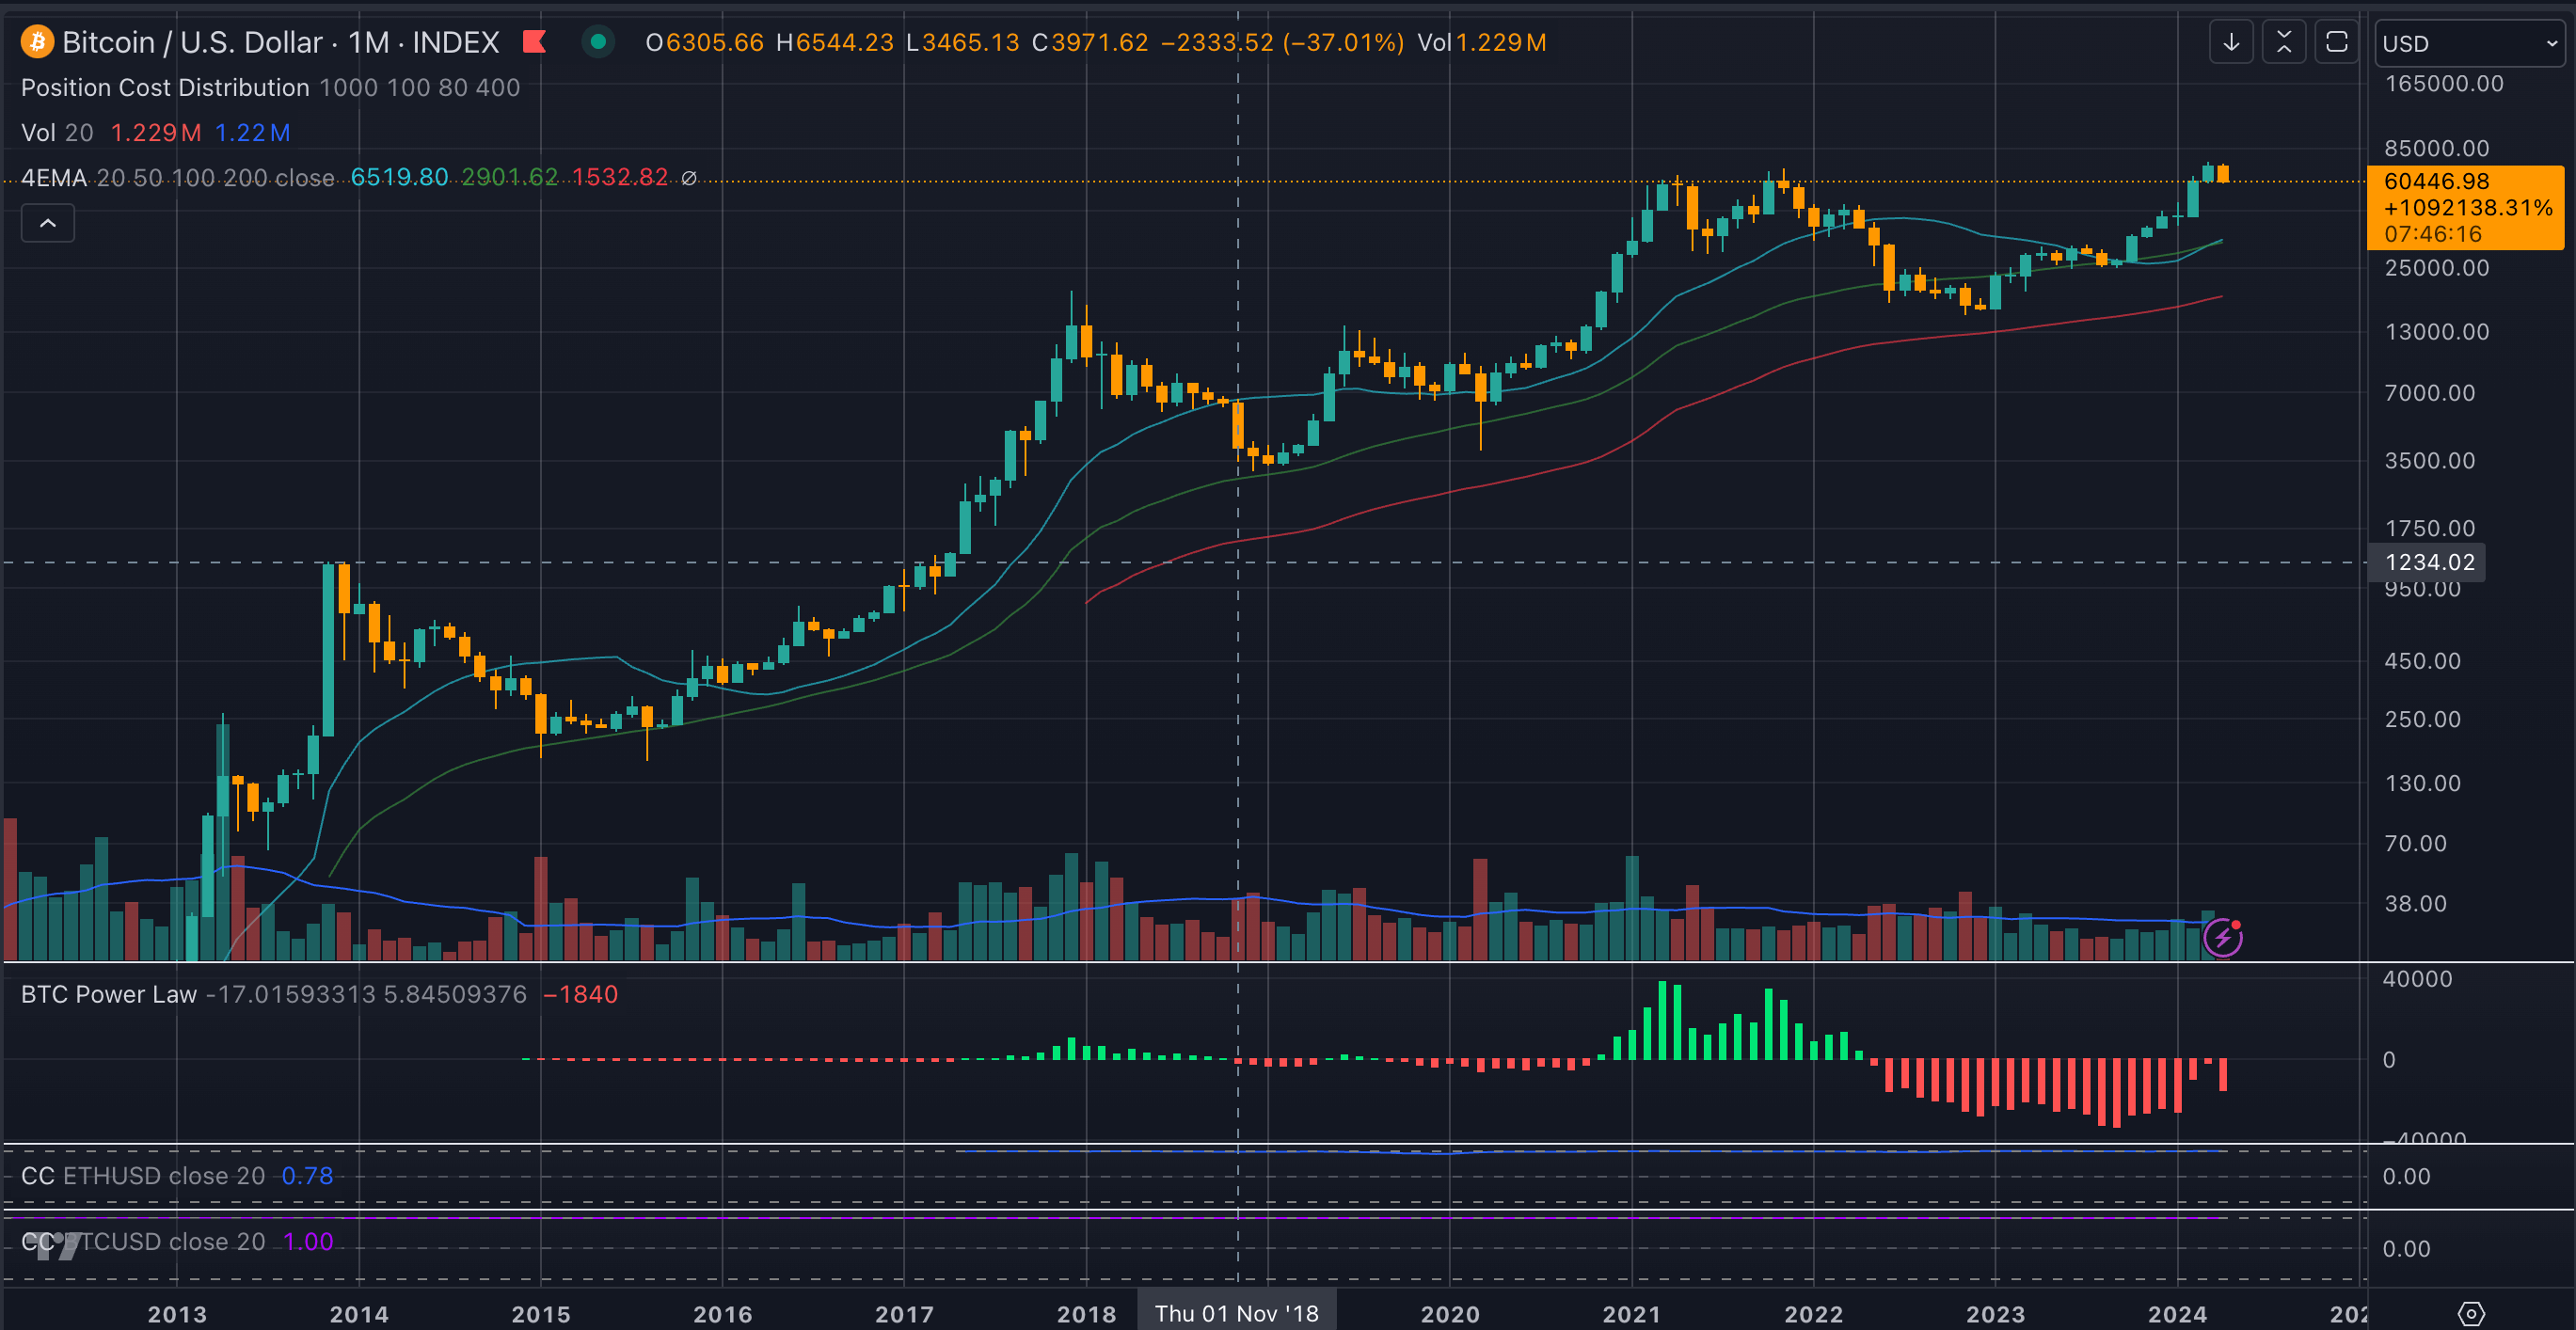 Bitcoin month-to-month candles since 2013 (TradingView)